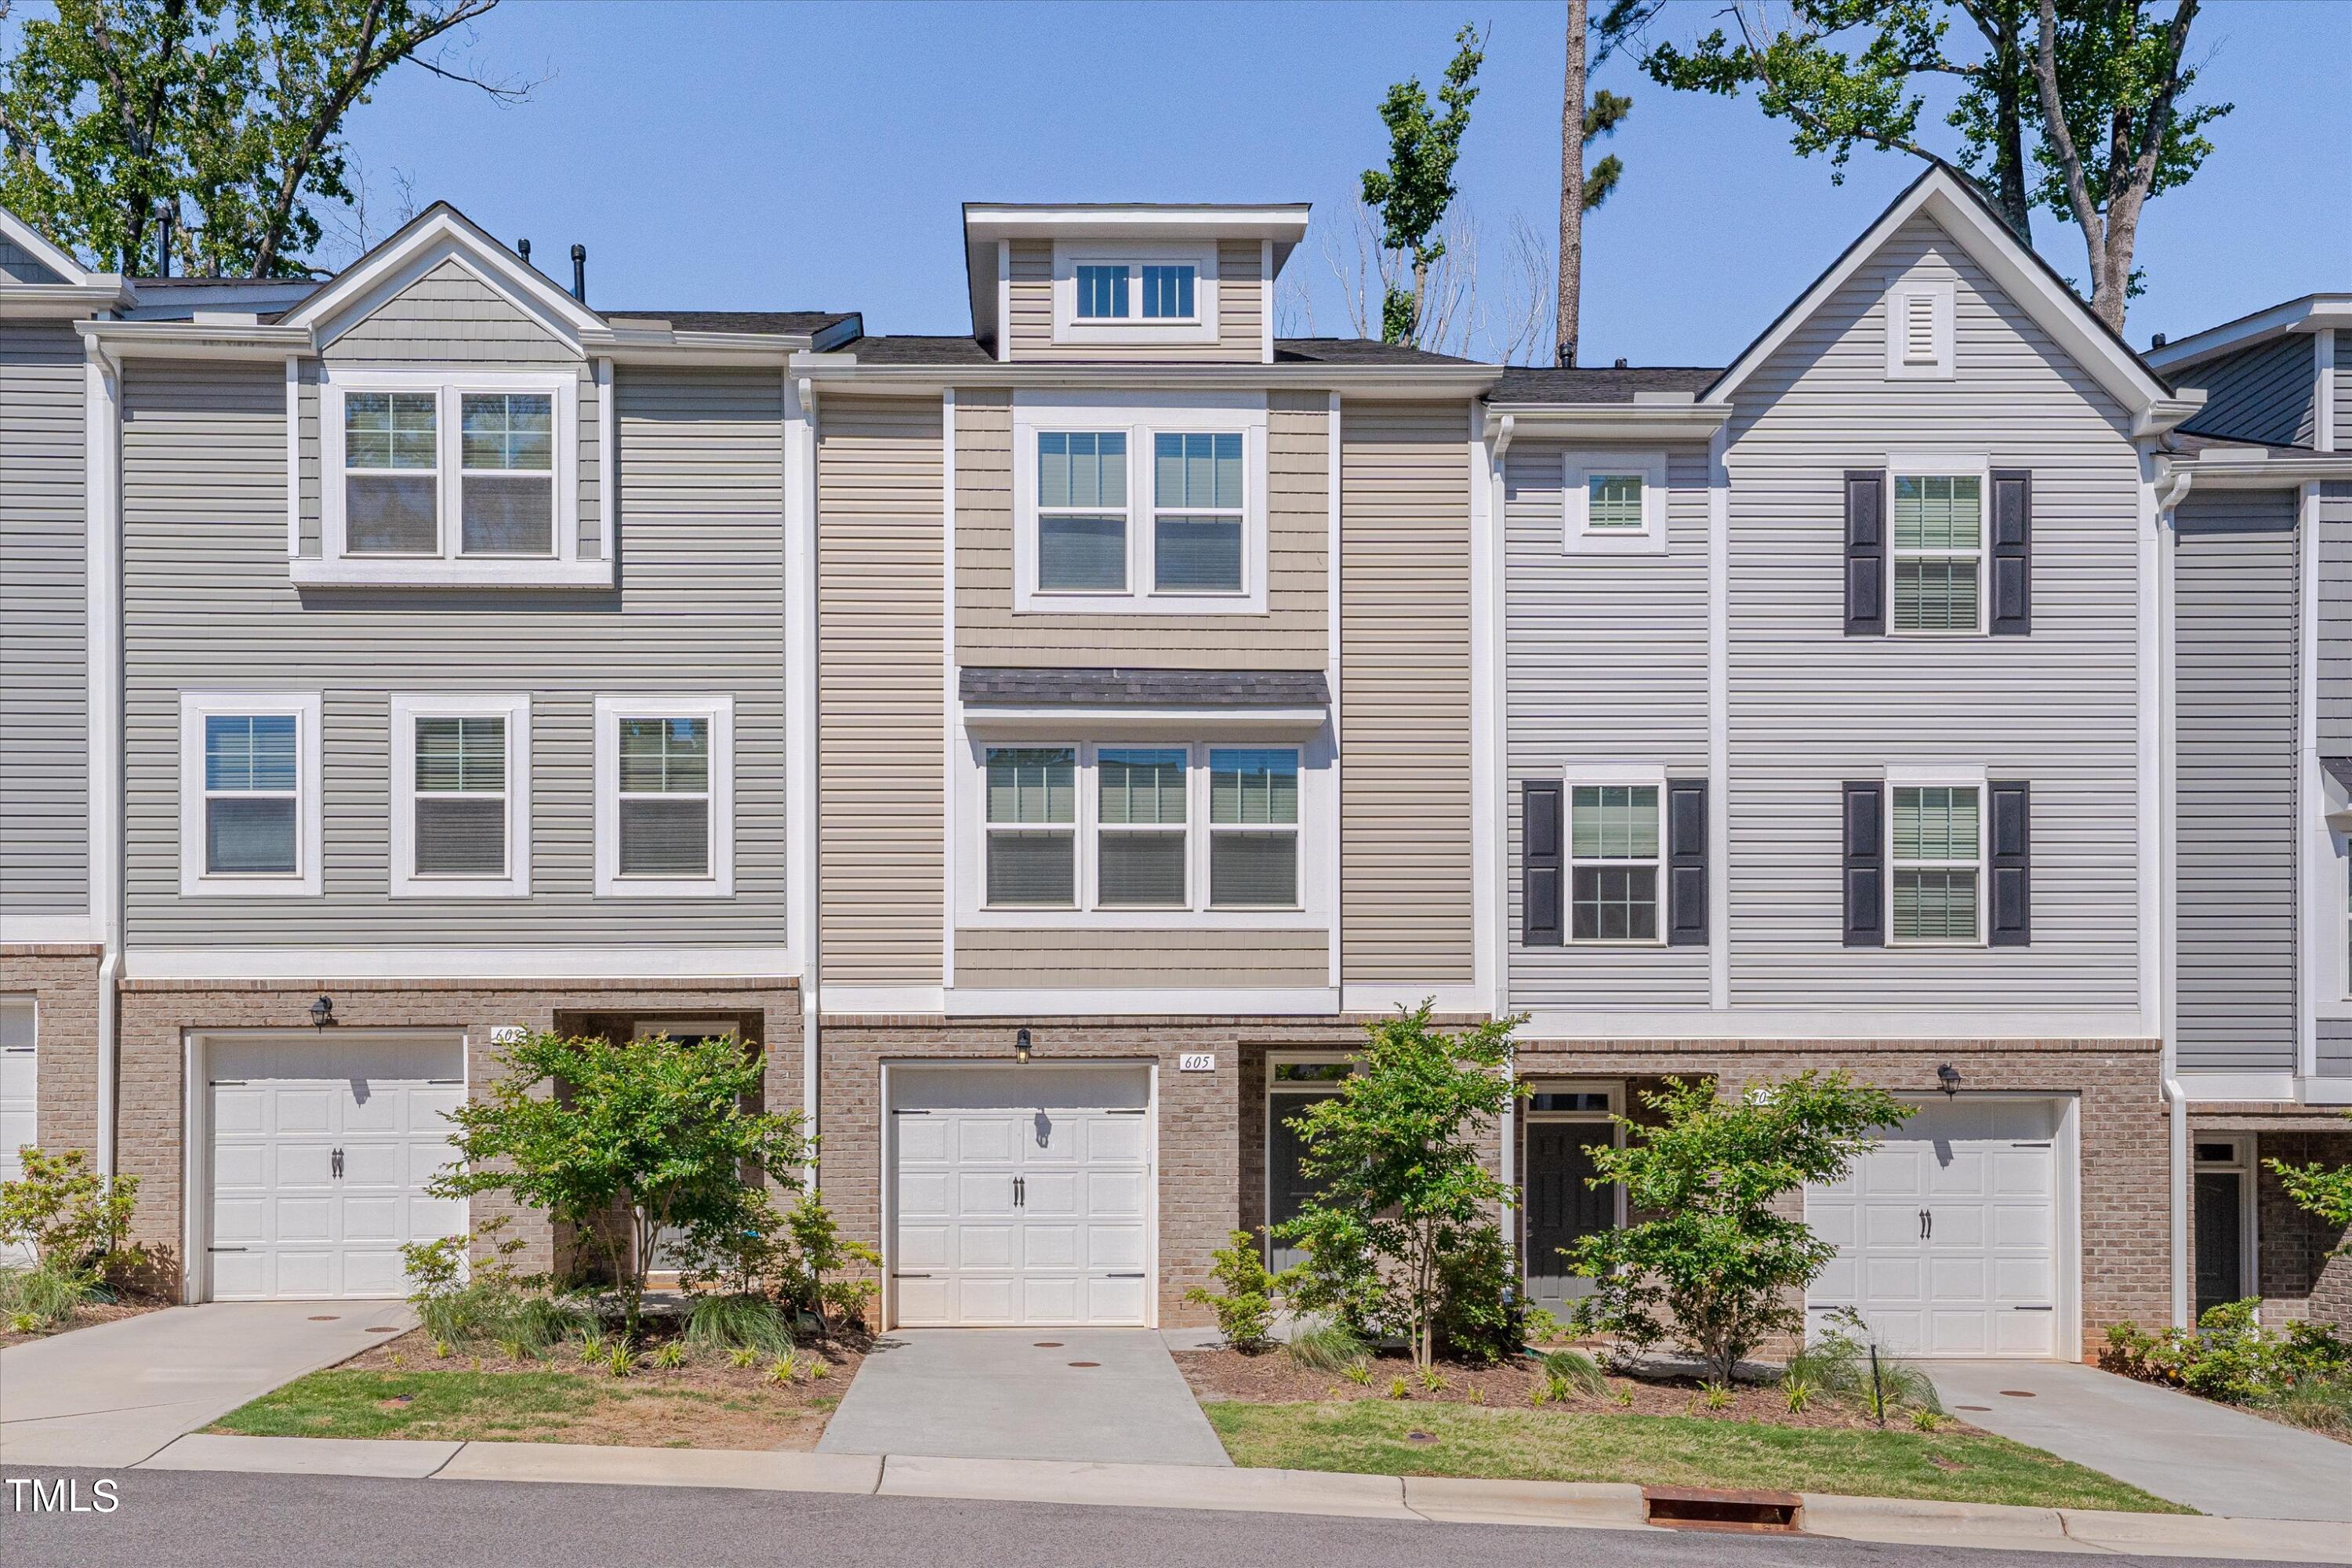 View Cary, NC 27513 townhome